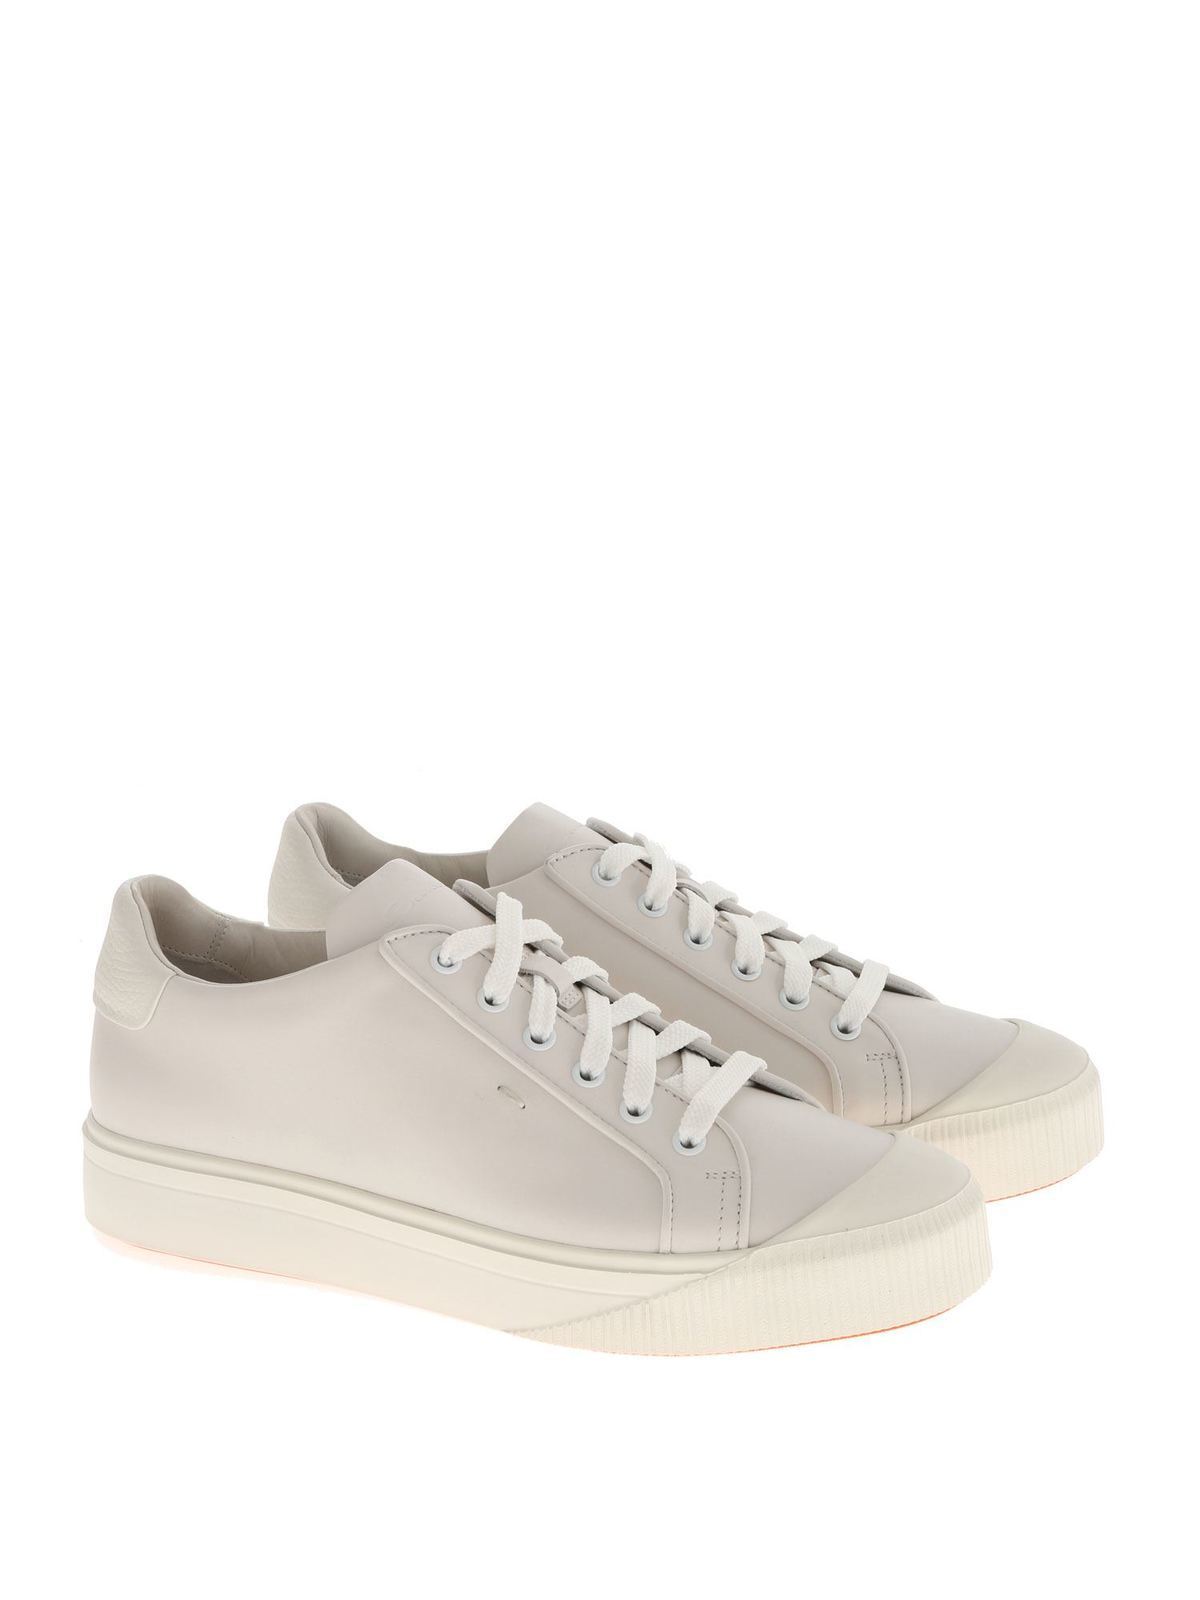 Trainers Santoni - Leather sneakers in ice color - MBCO21206BARGBNYI50